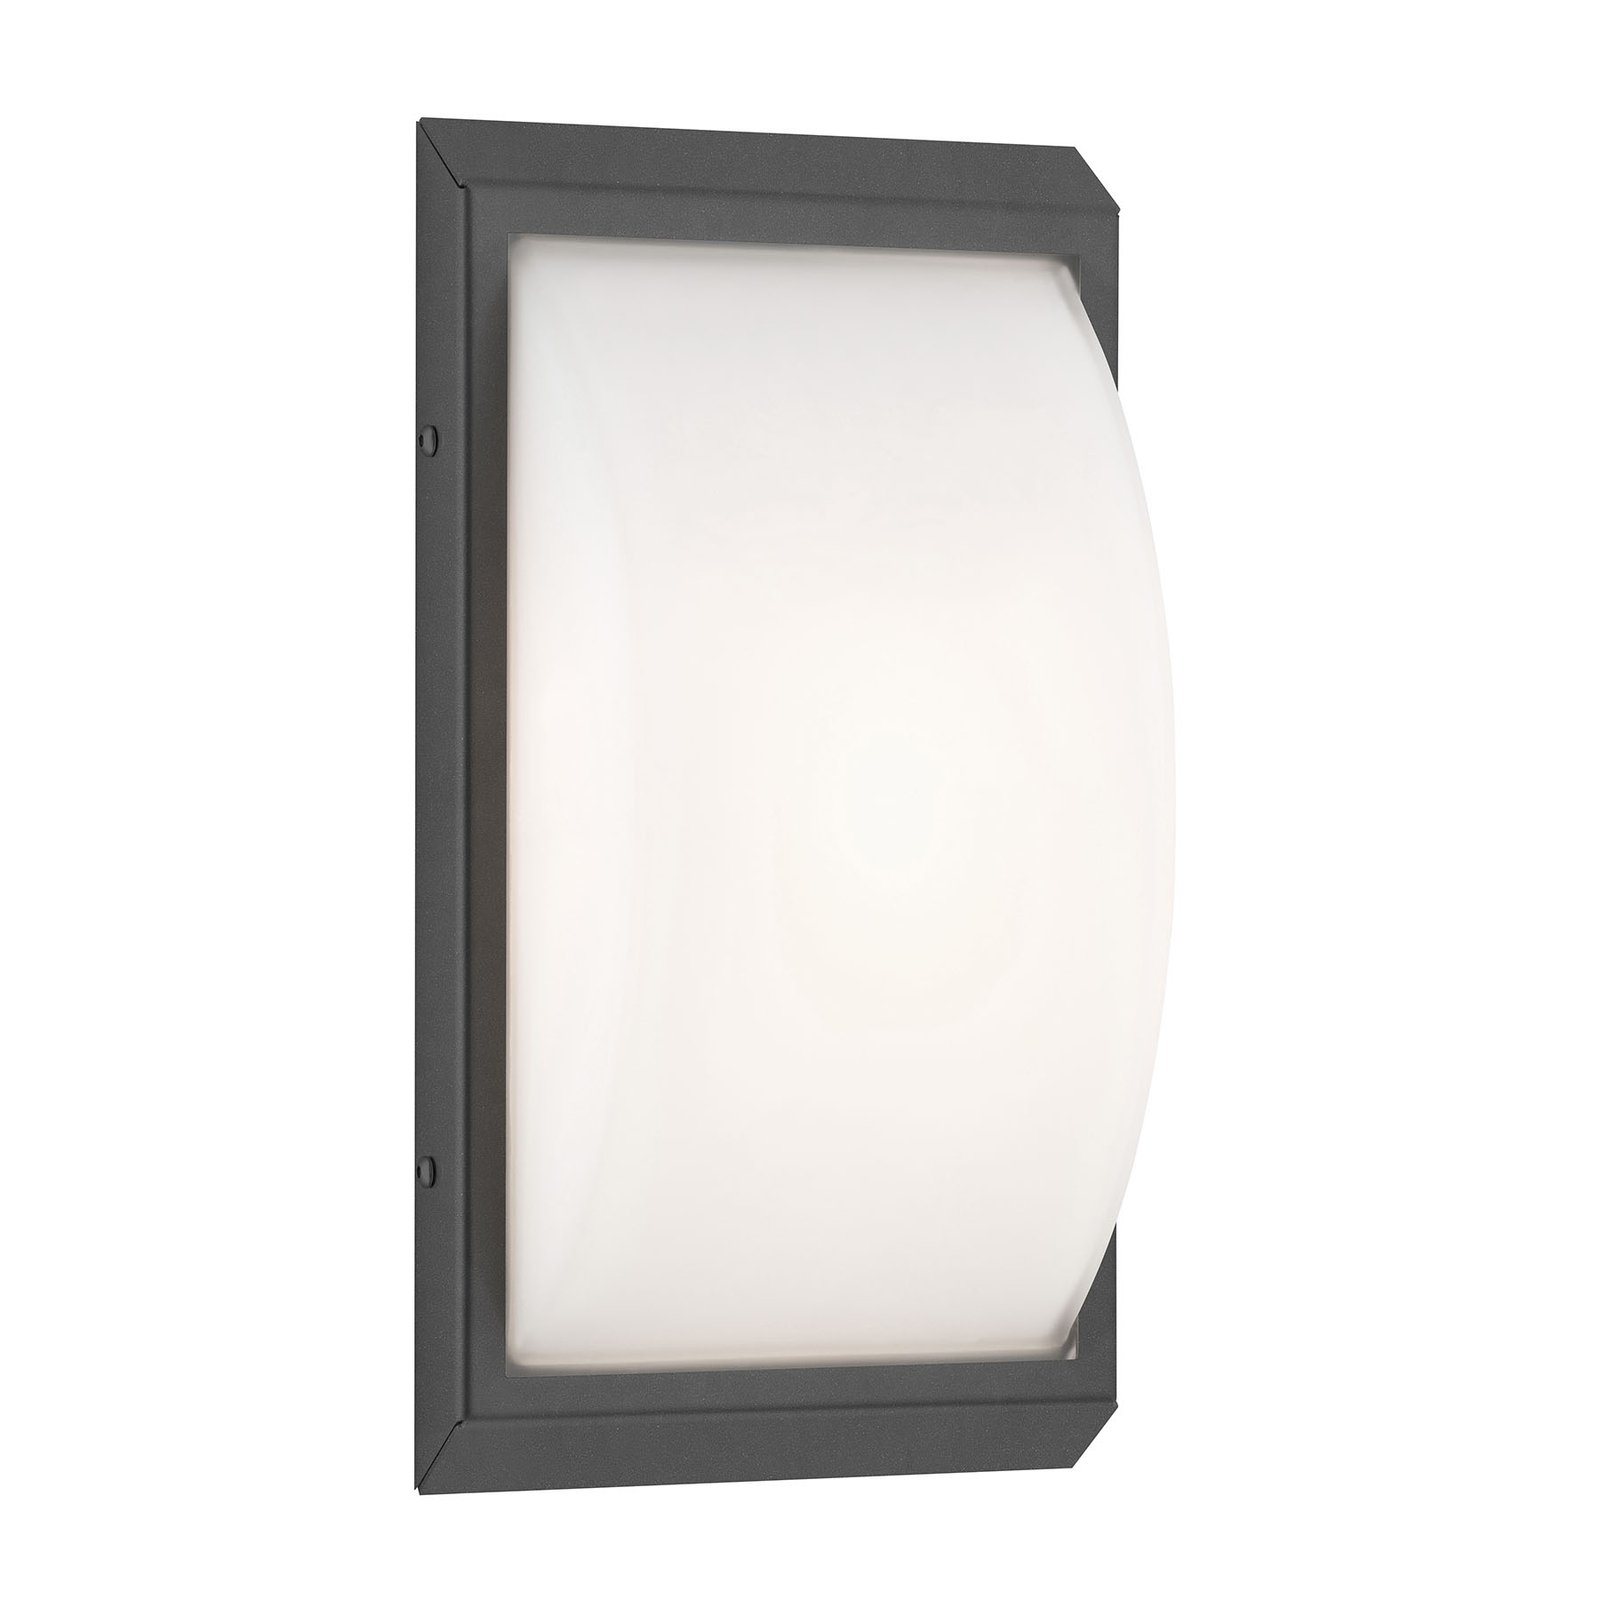 053 outdoor wall light, stainless steel, graphite